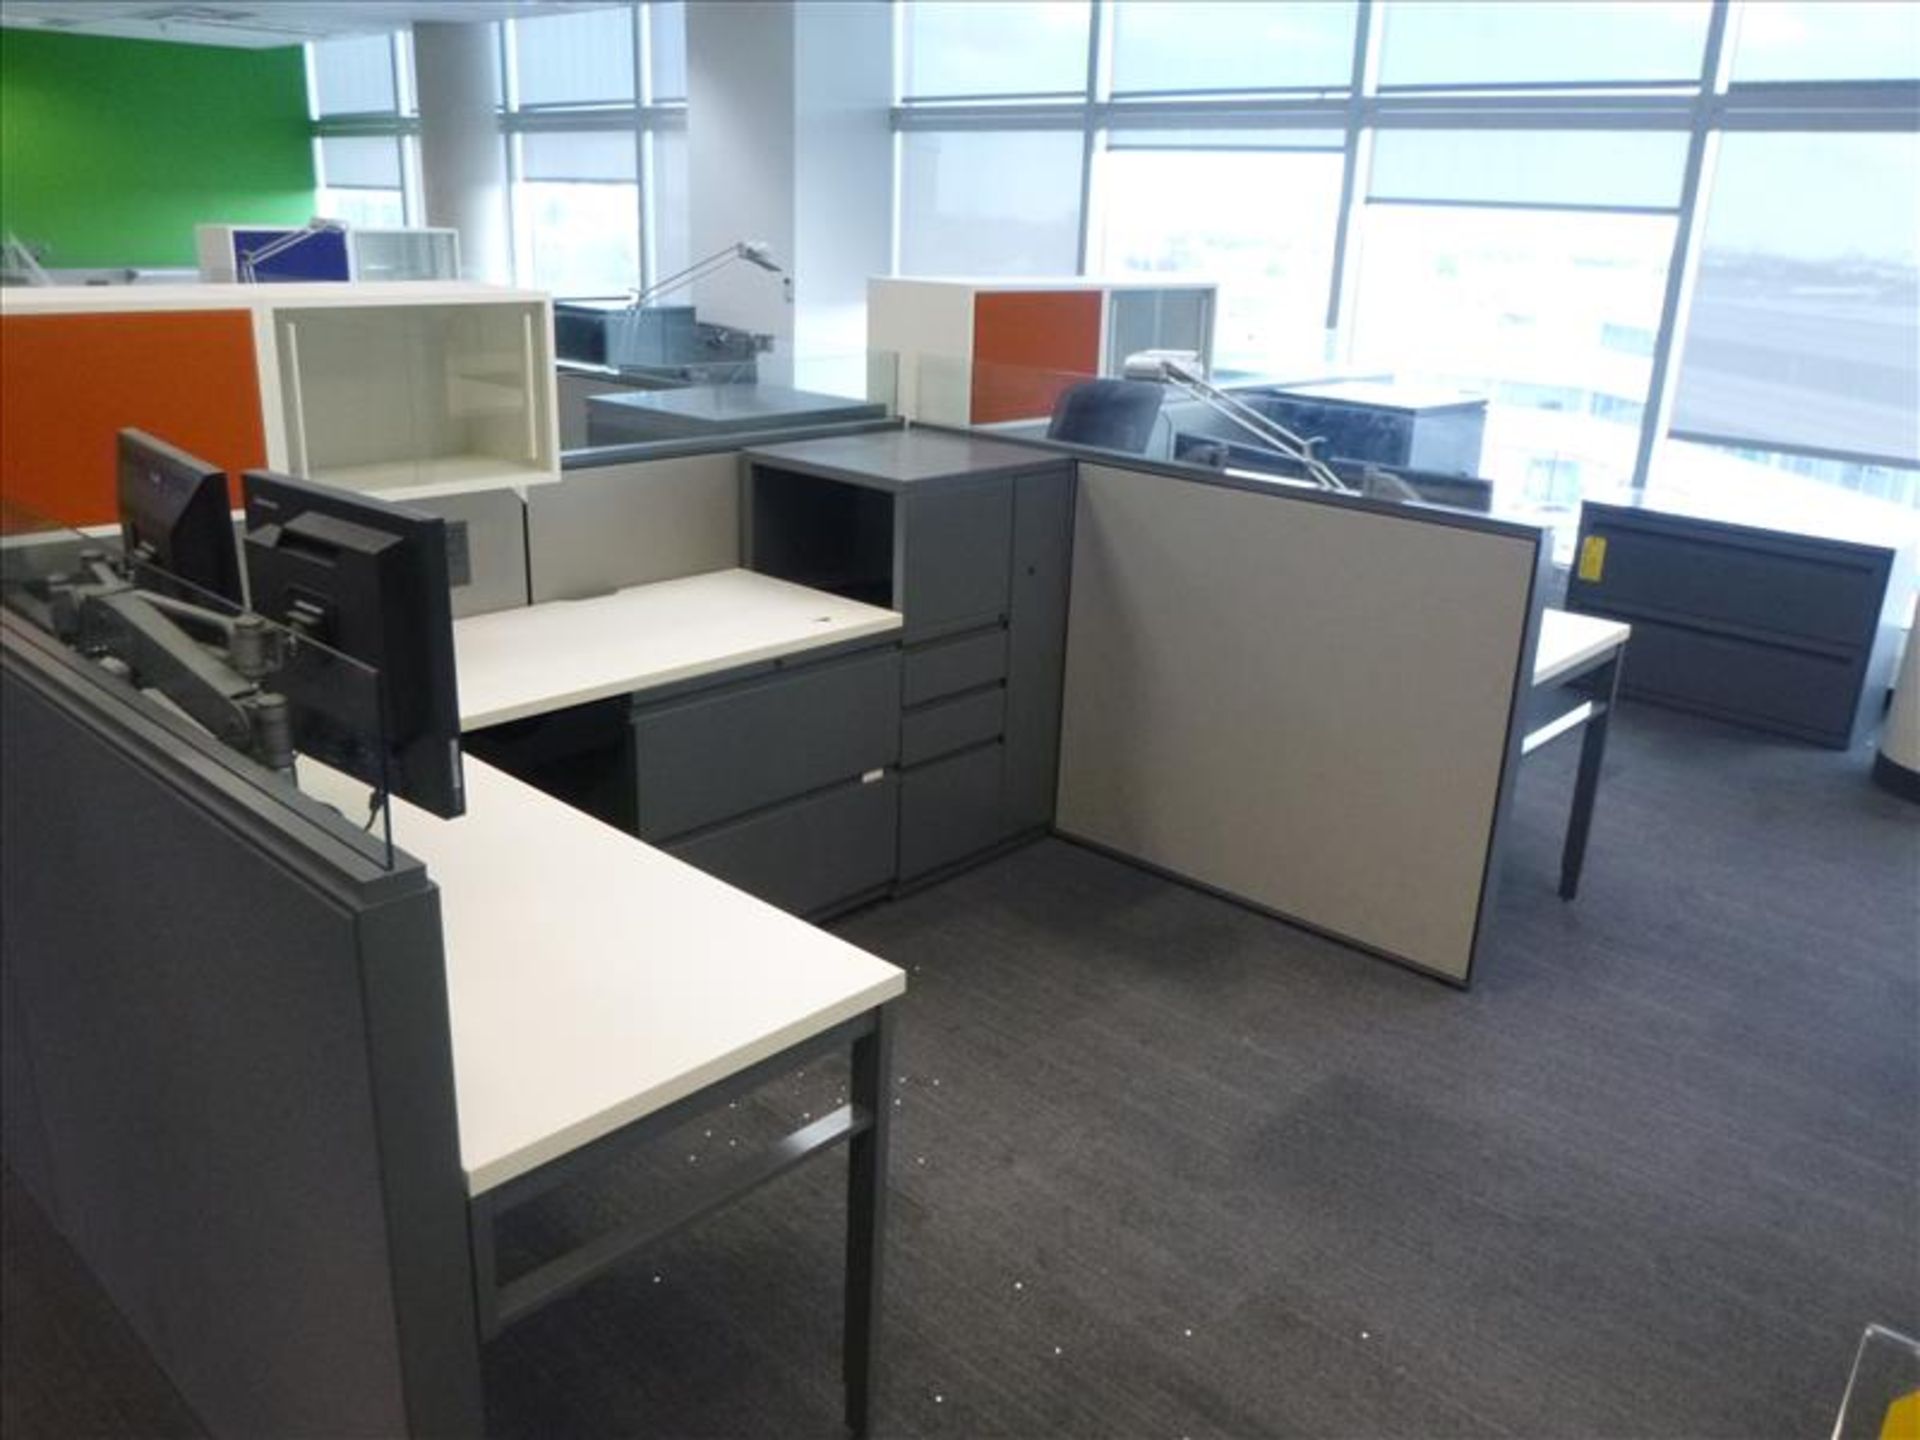 (4) Haworth cubicle workstations, approx. 12' x 20' footprint (excl. contents and office